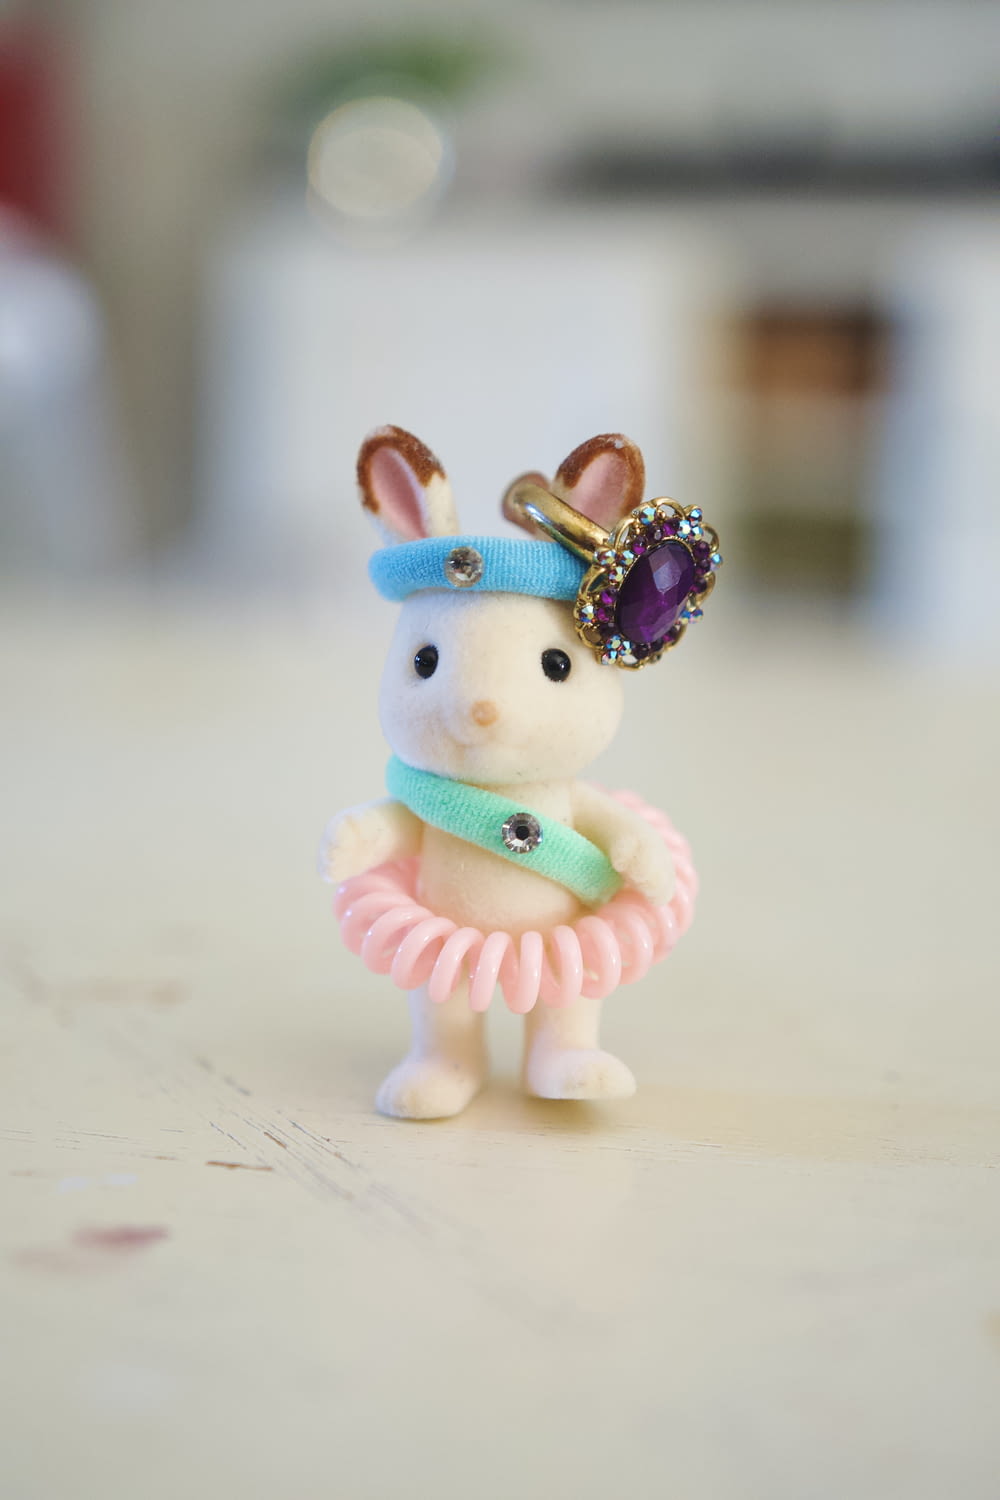 a small toy rabbit wearing a dress and a tiara